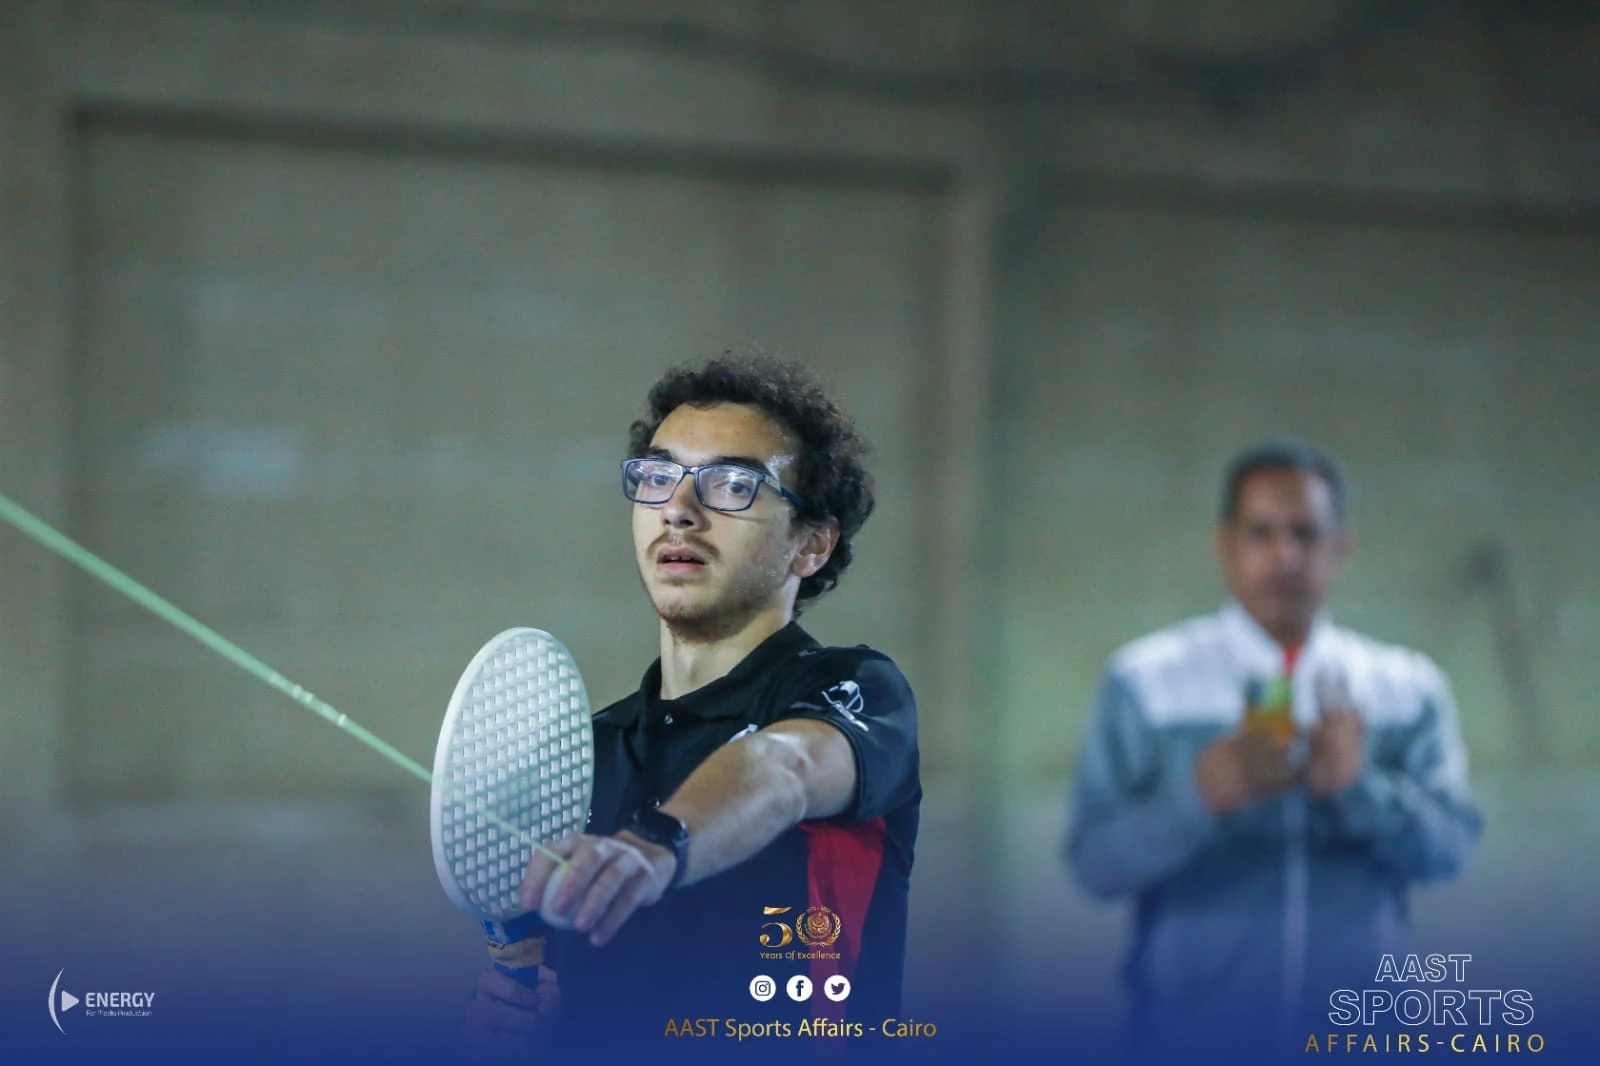 The academy was crowned in Cairo with the first place Cup in the student championship and the first place Cup in the female student championship in the private universities Speedball Championship6